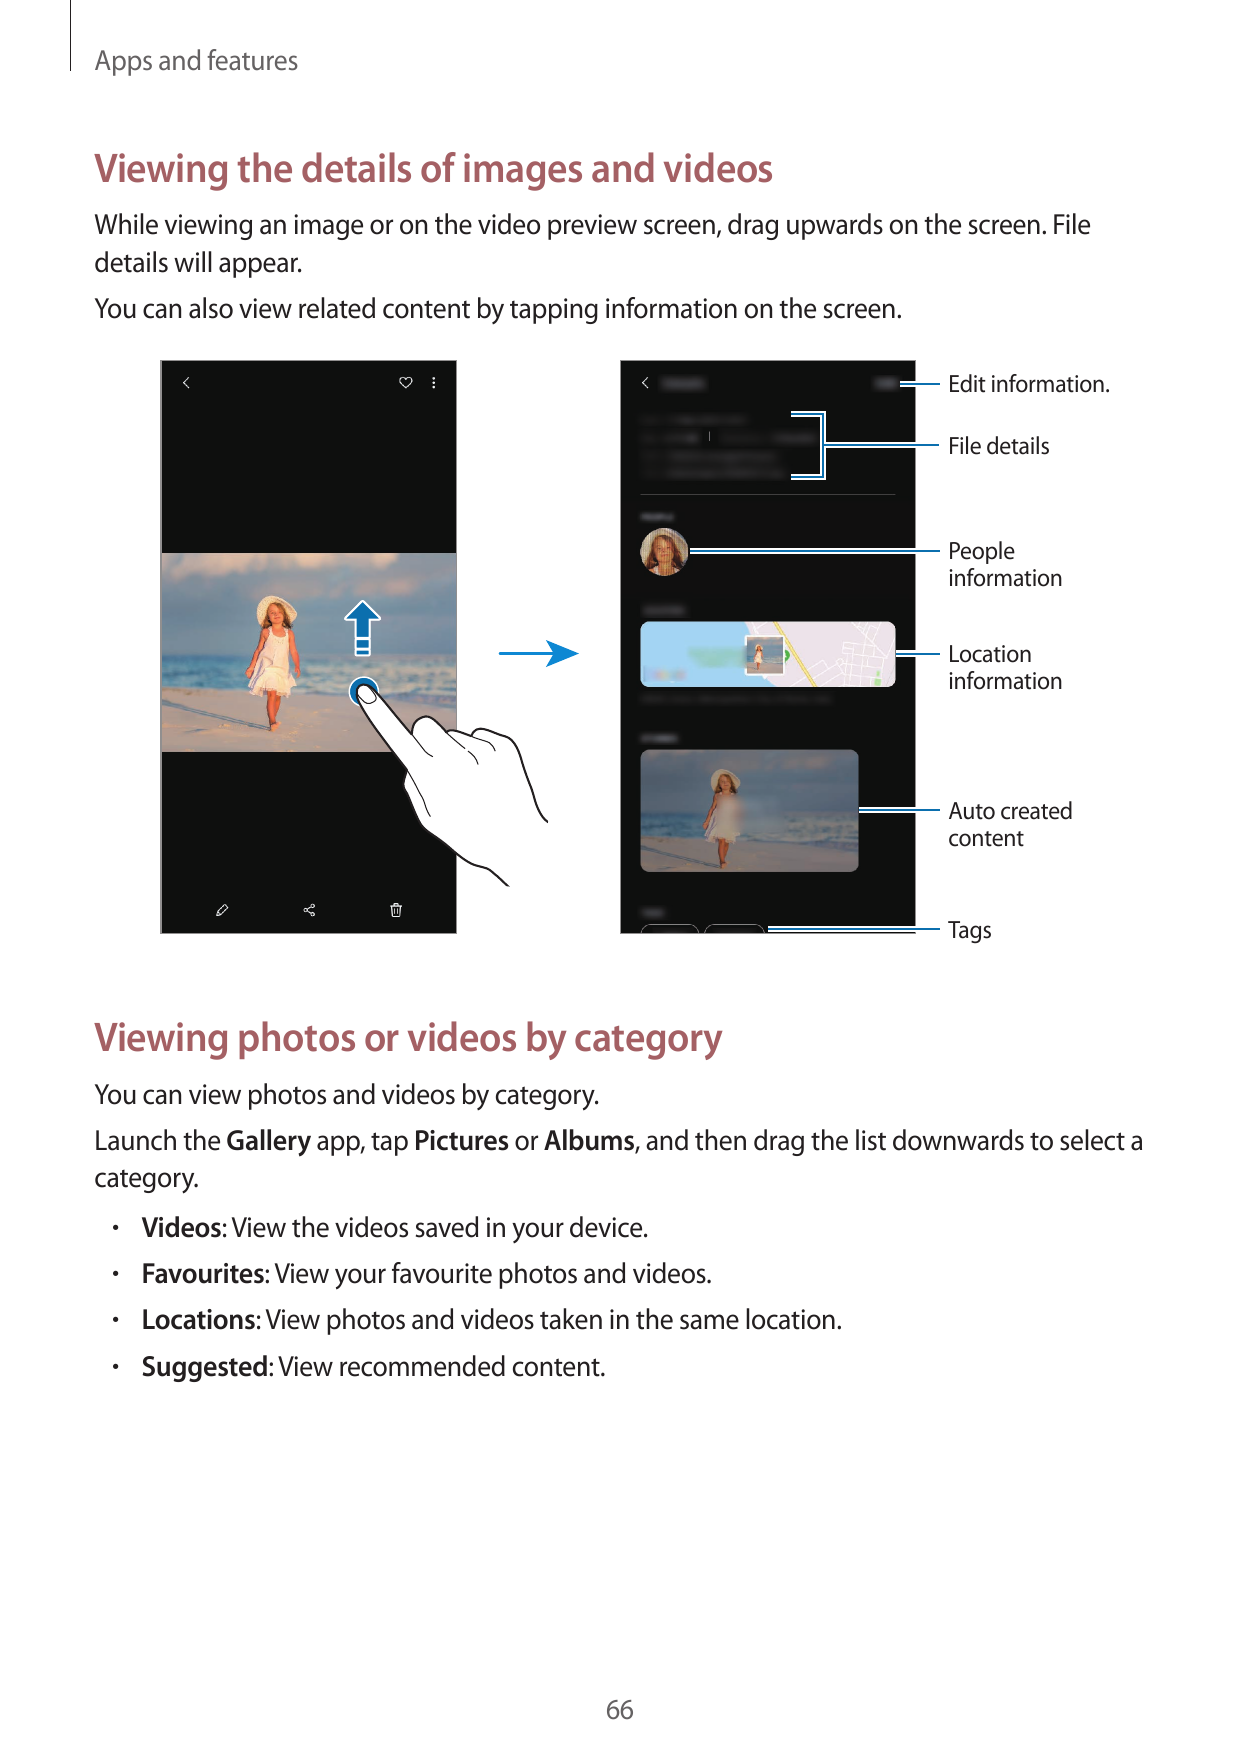 Apps and featuresViewing the details of images and videosWhile viewing an image or on the video preview screen, drag upwards on 